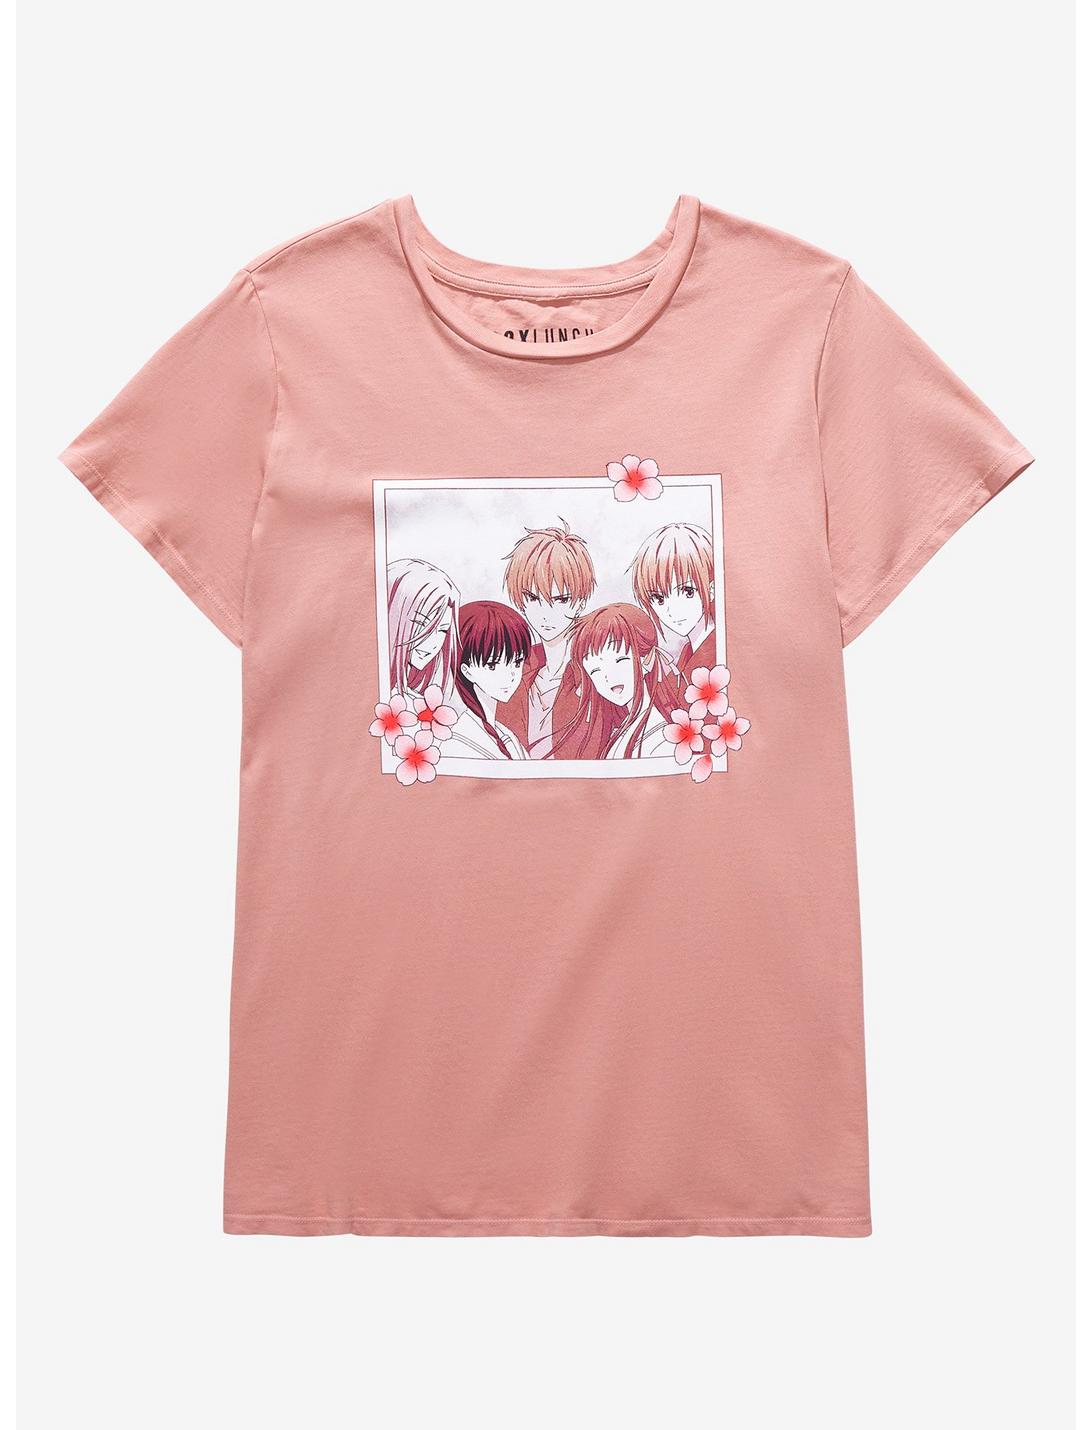 Fruits Basket Group Photo Women’s Plus Size T-Shirt - BoxLunch Exclusive, LIGHT PINK, hi-res